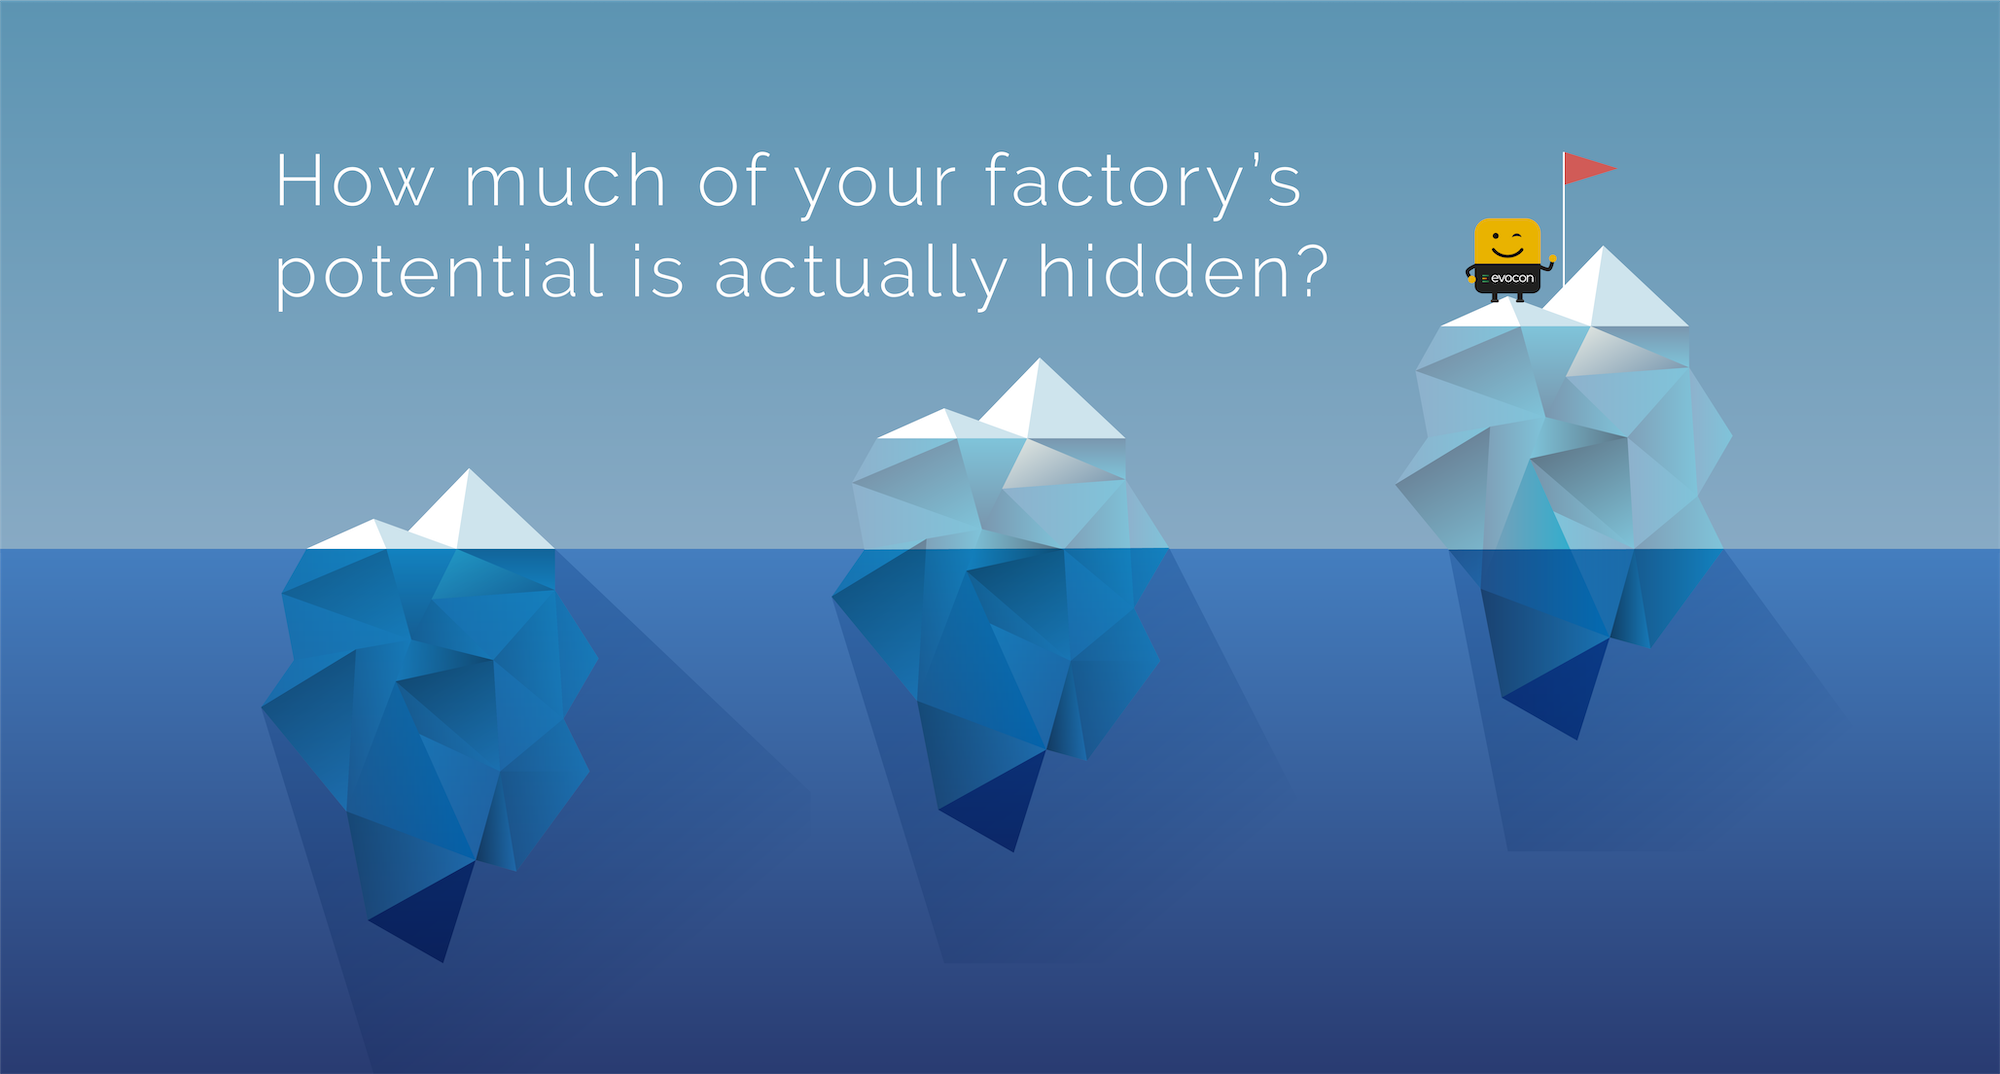 What is hidden potential and OEE of your factory?